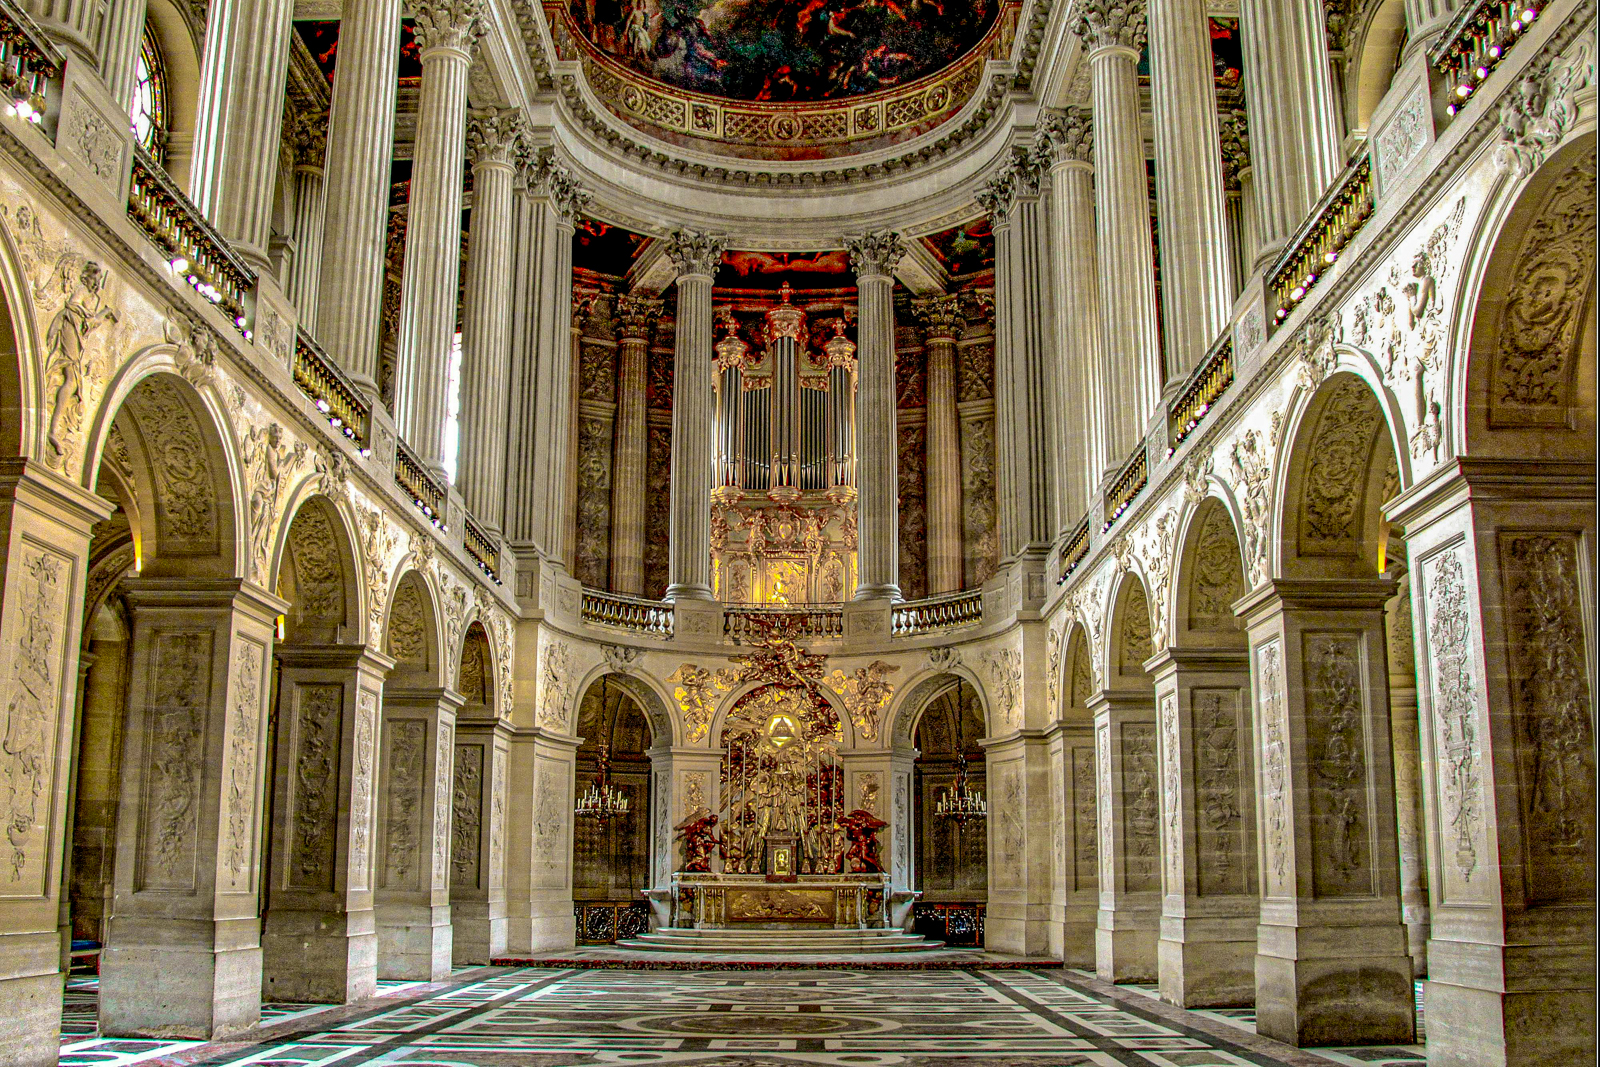 Interior of the Palace of Versailles